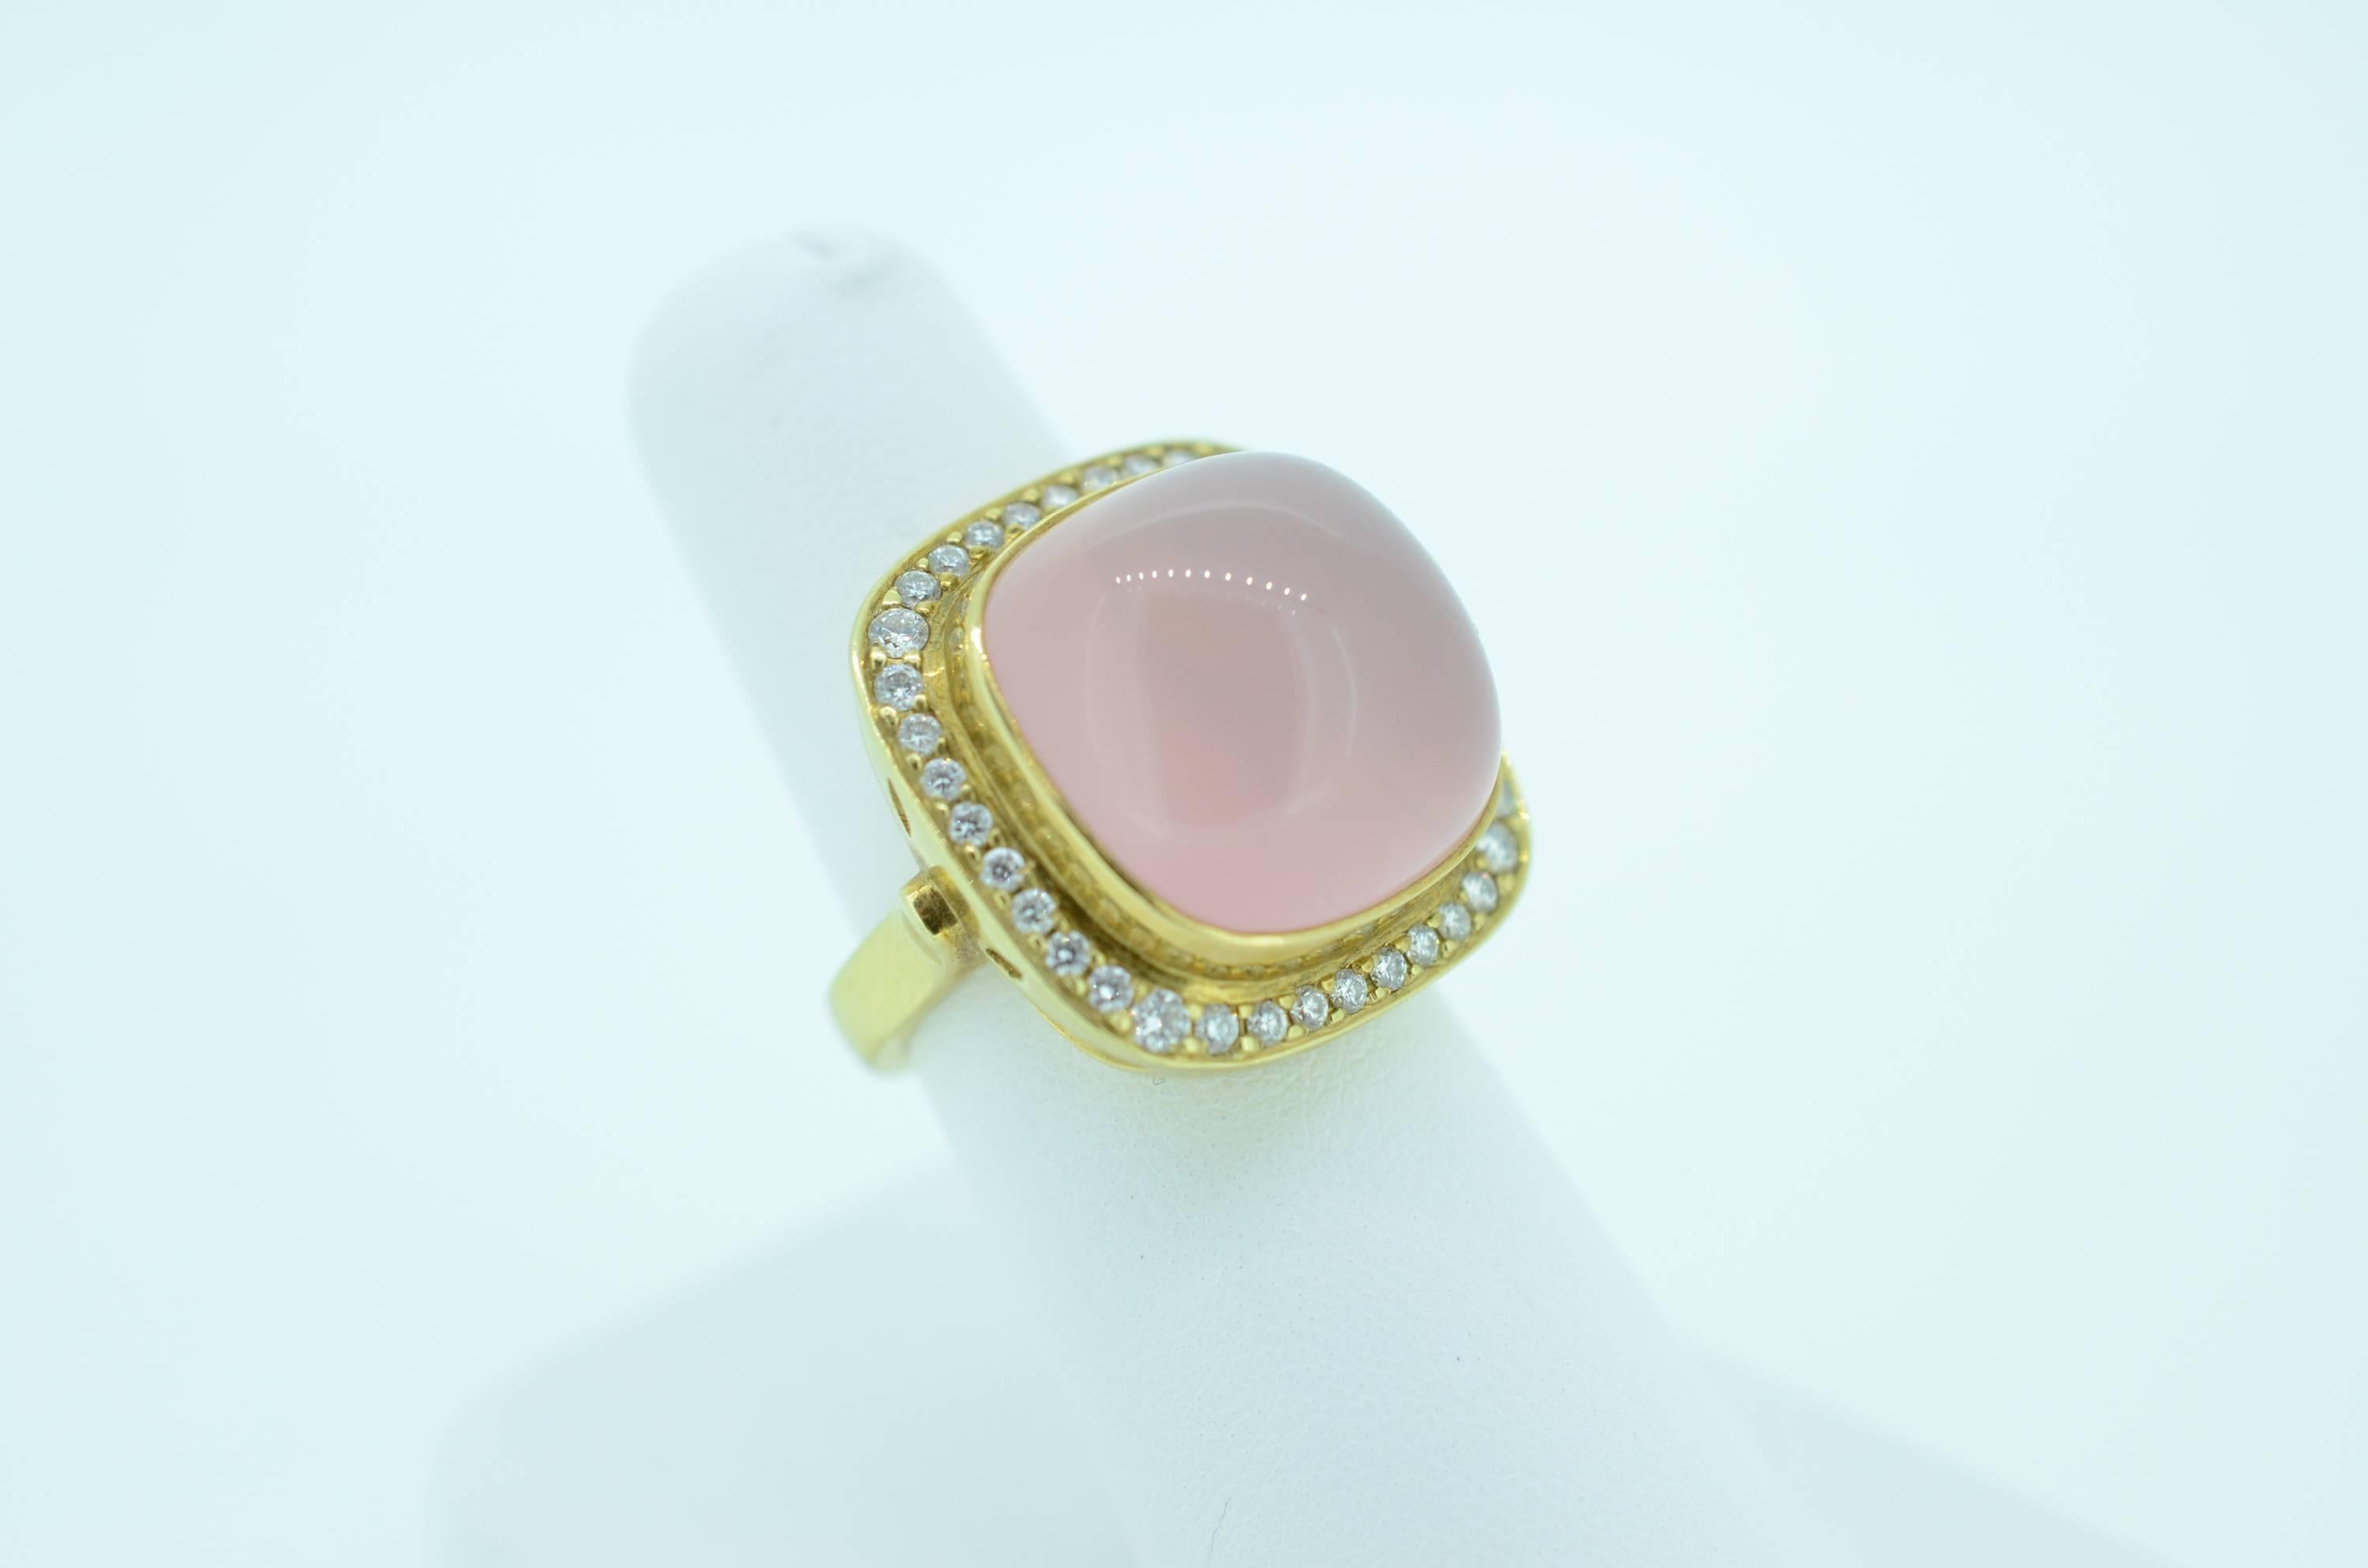 Beautiful one of a kind fabricated and cast Pink Quartz and Diamond Ring. Lost Wax process. 18kt yellow gold,22mm square Cabochon pink quartz with bead set diamonds framing the quartz. .50 total weight, VS clarity and G-H color.